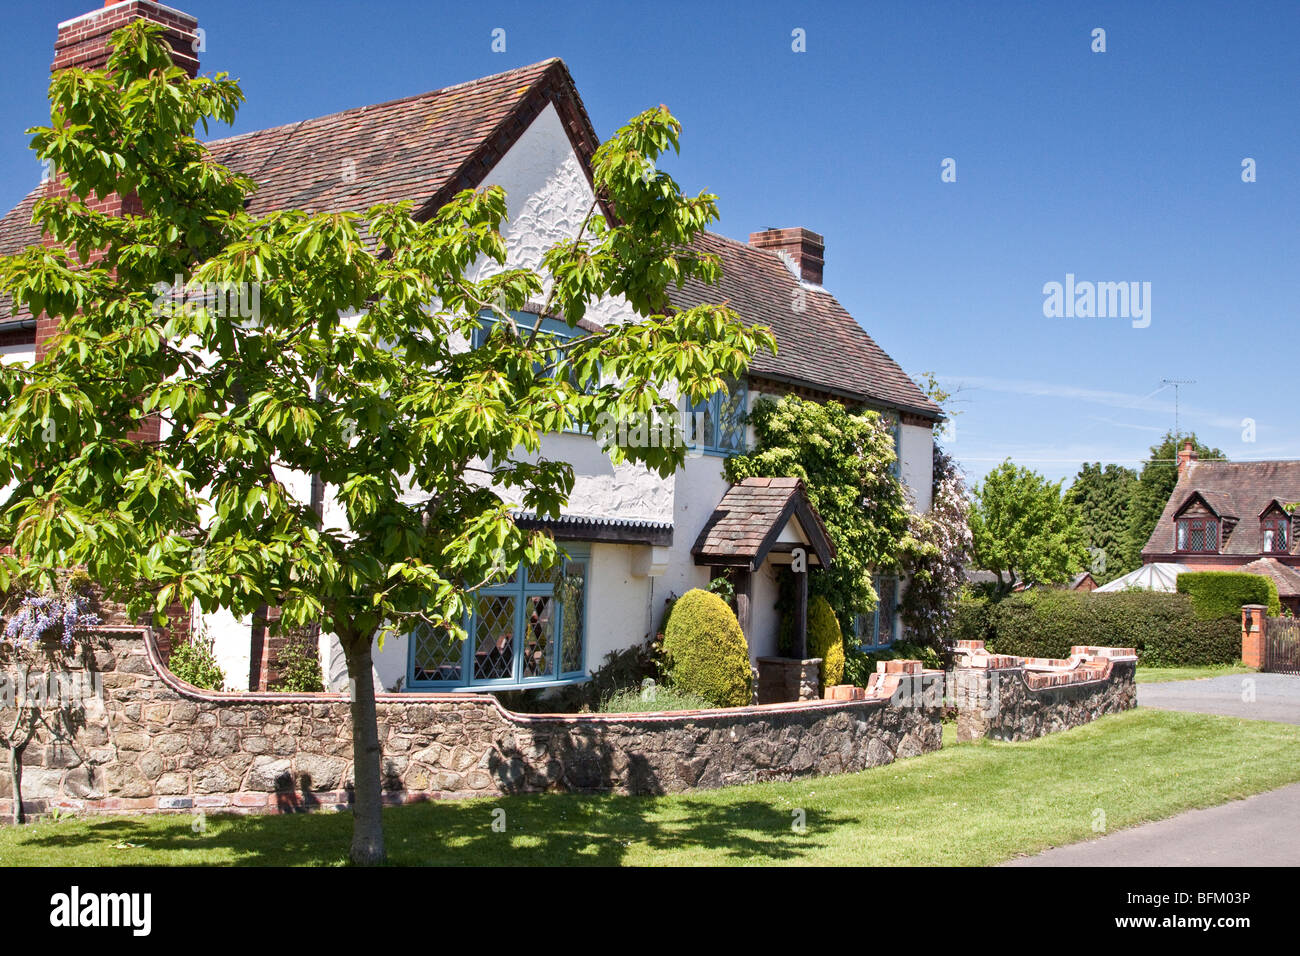 French country cottage, England UK Banque D'Images